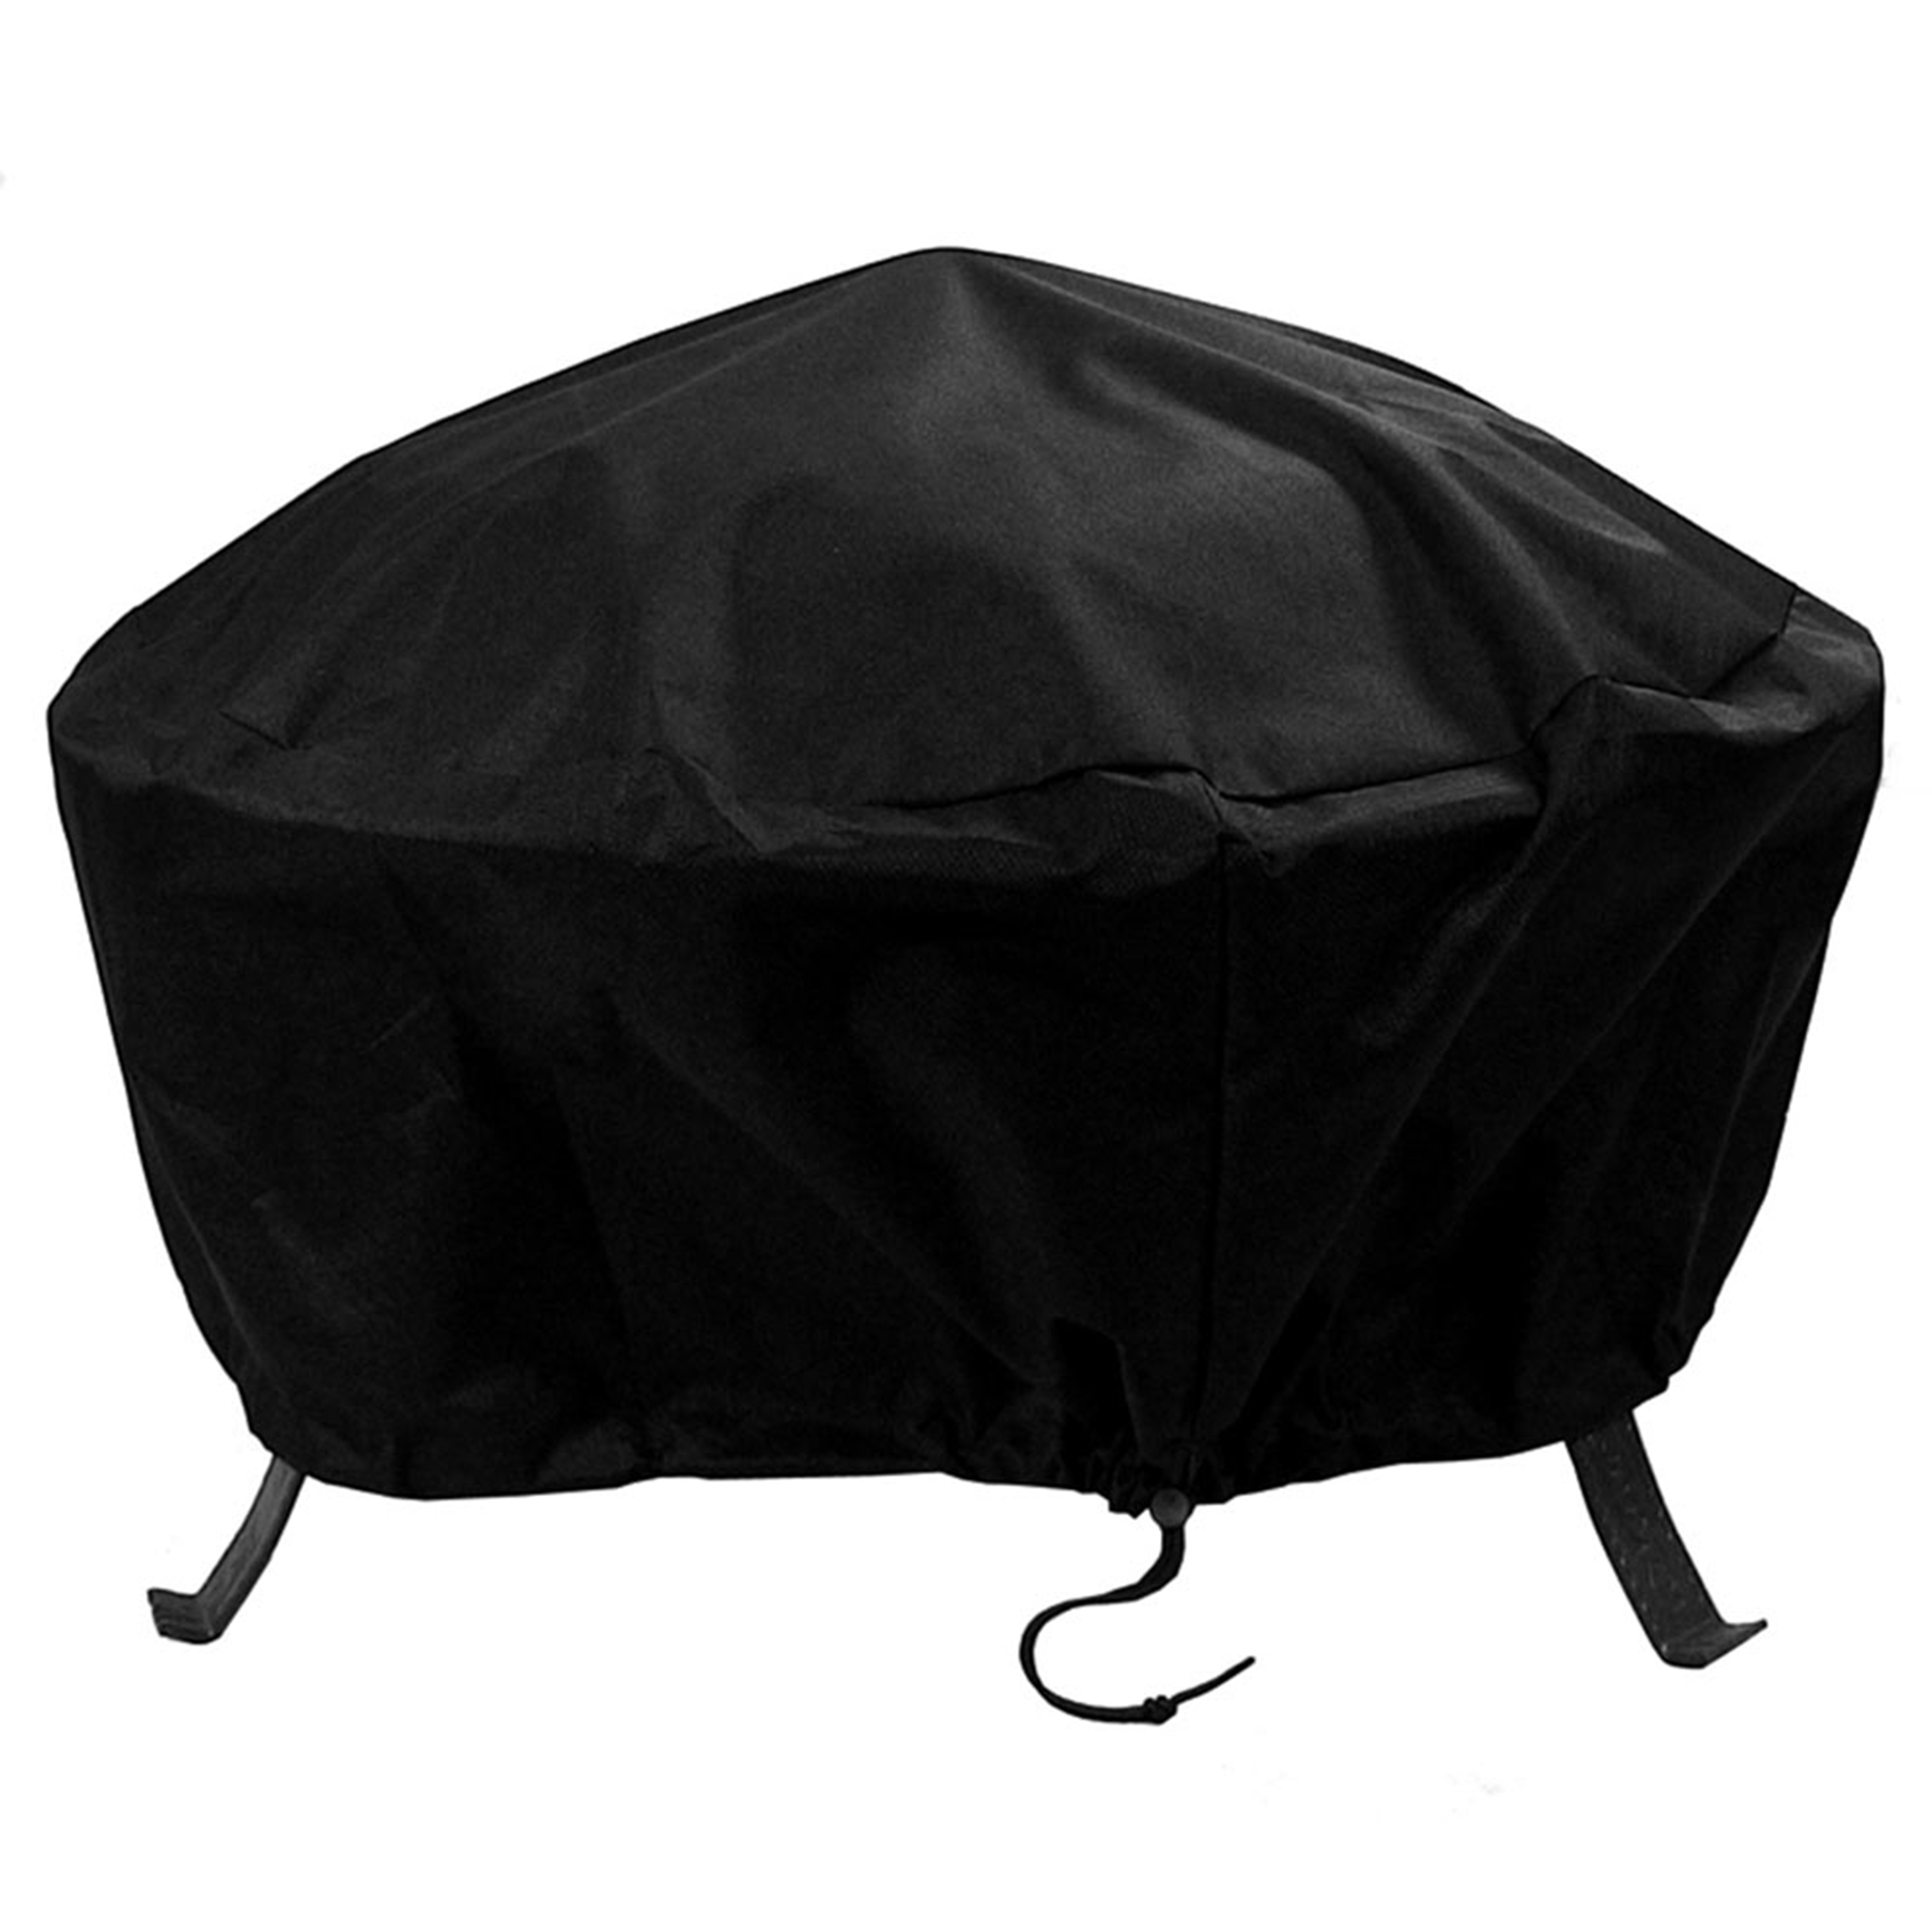 Sunnydaze Heavy-Duty Weather-Resistant Round Fire Pit Cover with Drawstring and Toggle Closure, Size and Color Options Available, Black, 30-inch Diameter